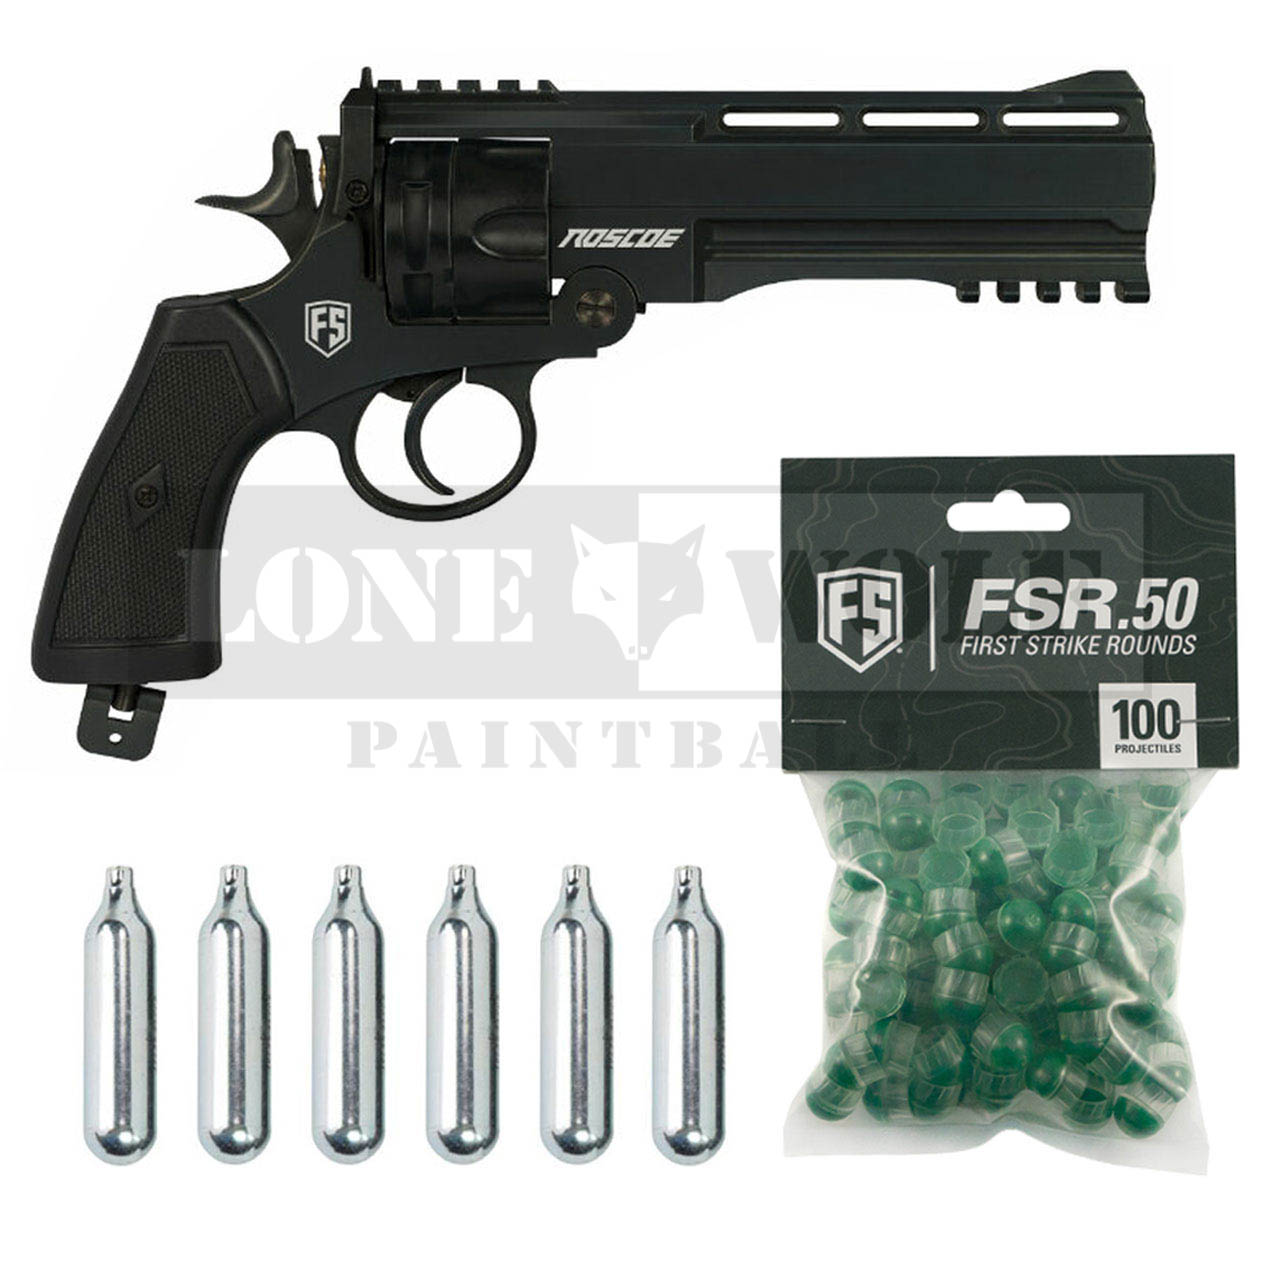 First Strike Roscoe Revolver 50 Caliber Deluxe Kit Lone Wolf Paintball